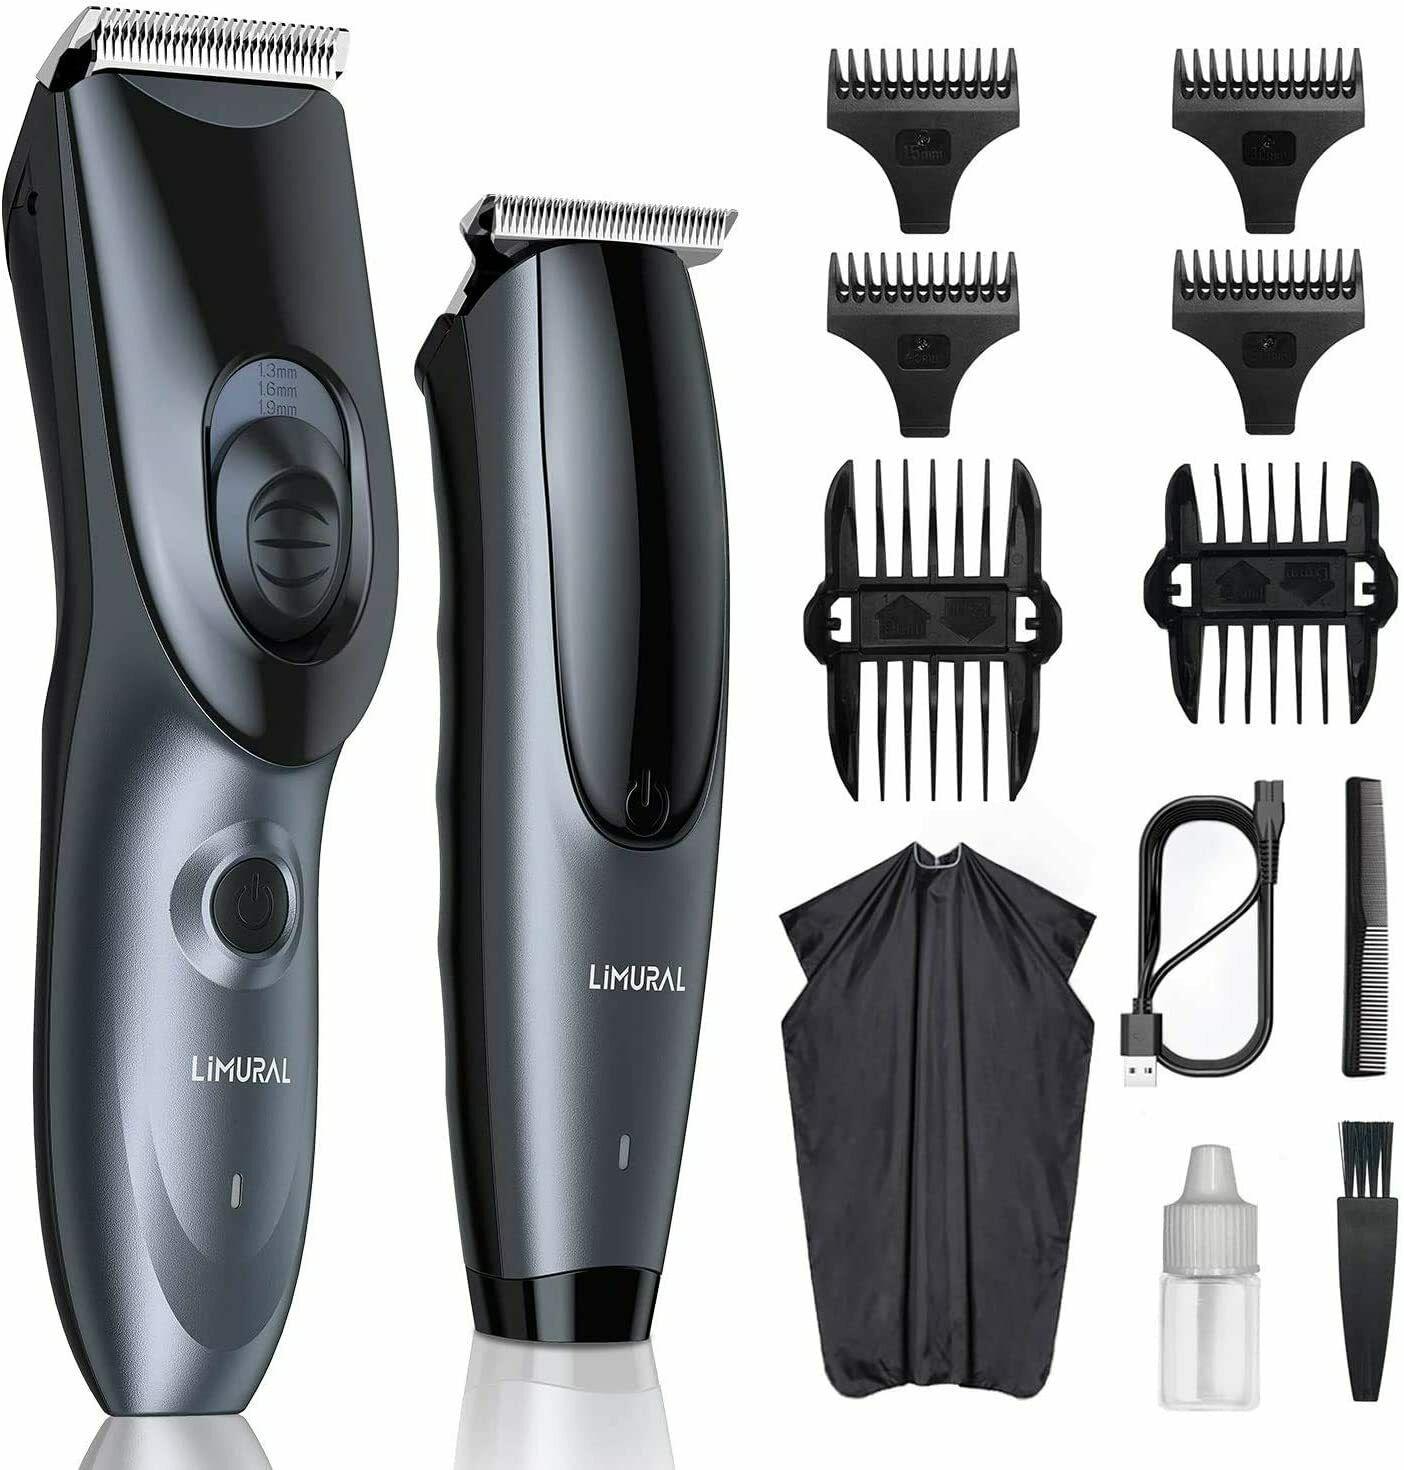 Limural LM-7250+7256 Professional Electric Hair/Beard Cordless Trimmer Kit